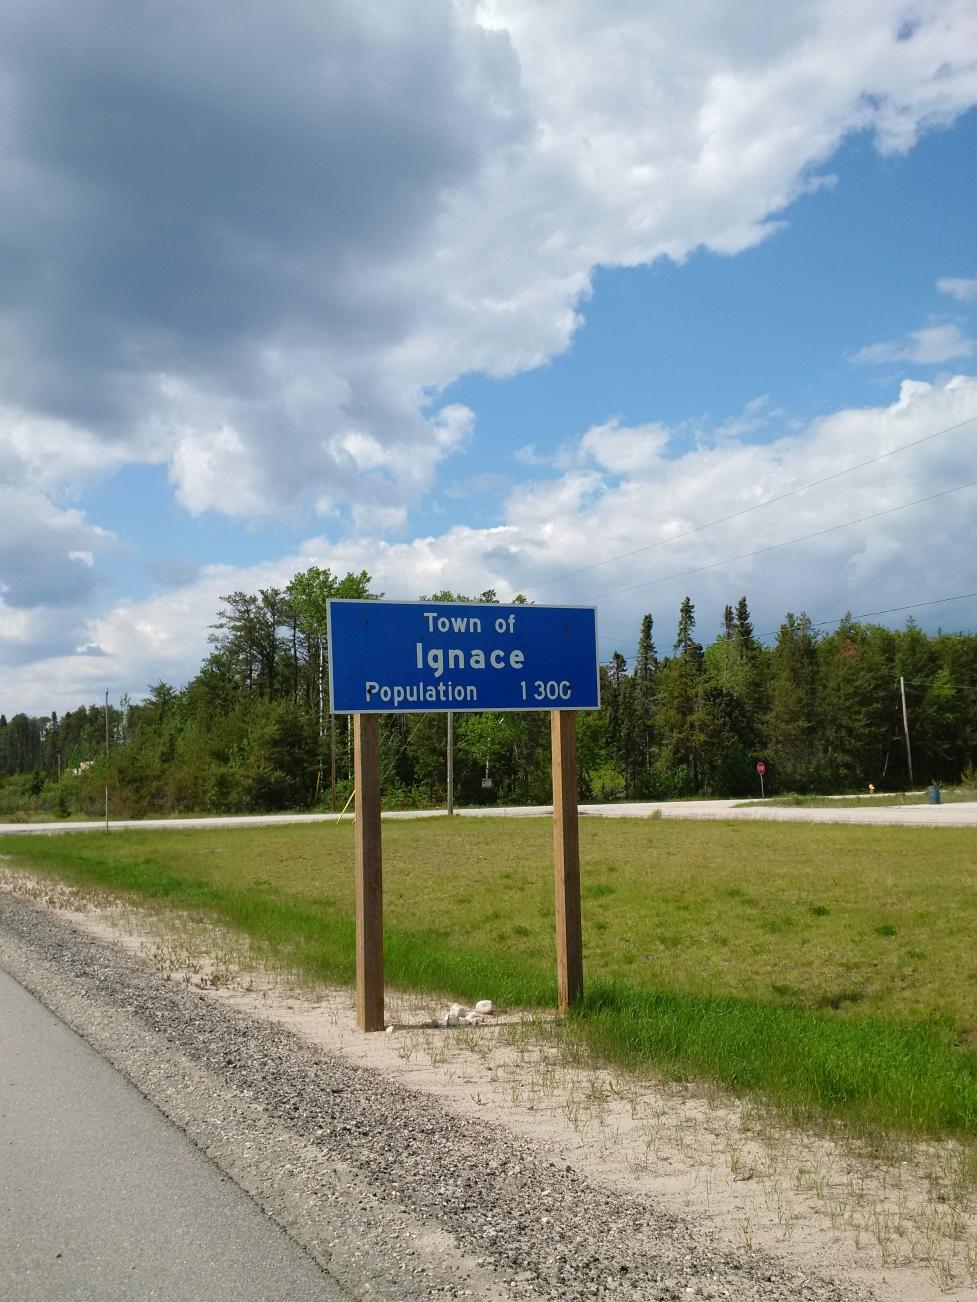 Picture of sign for Ignace, Ontario